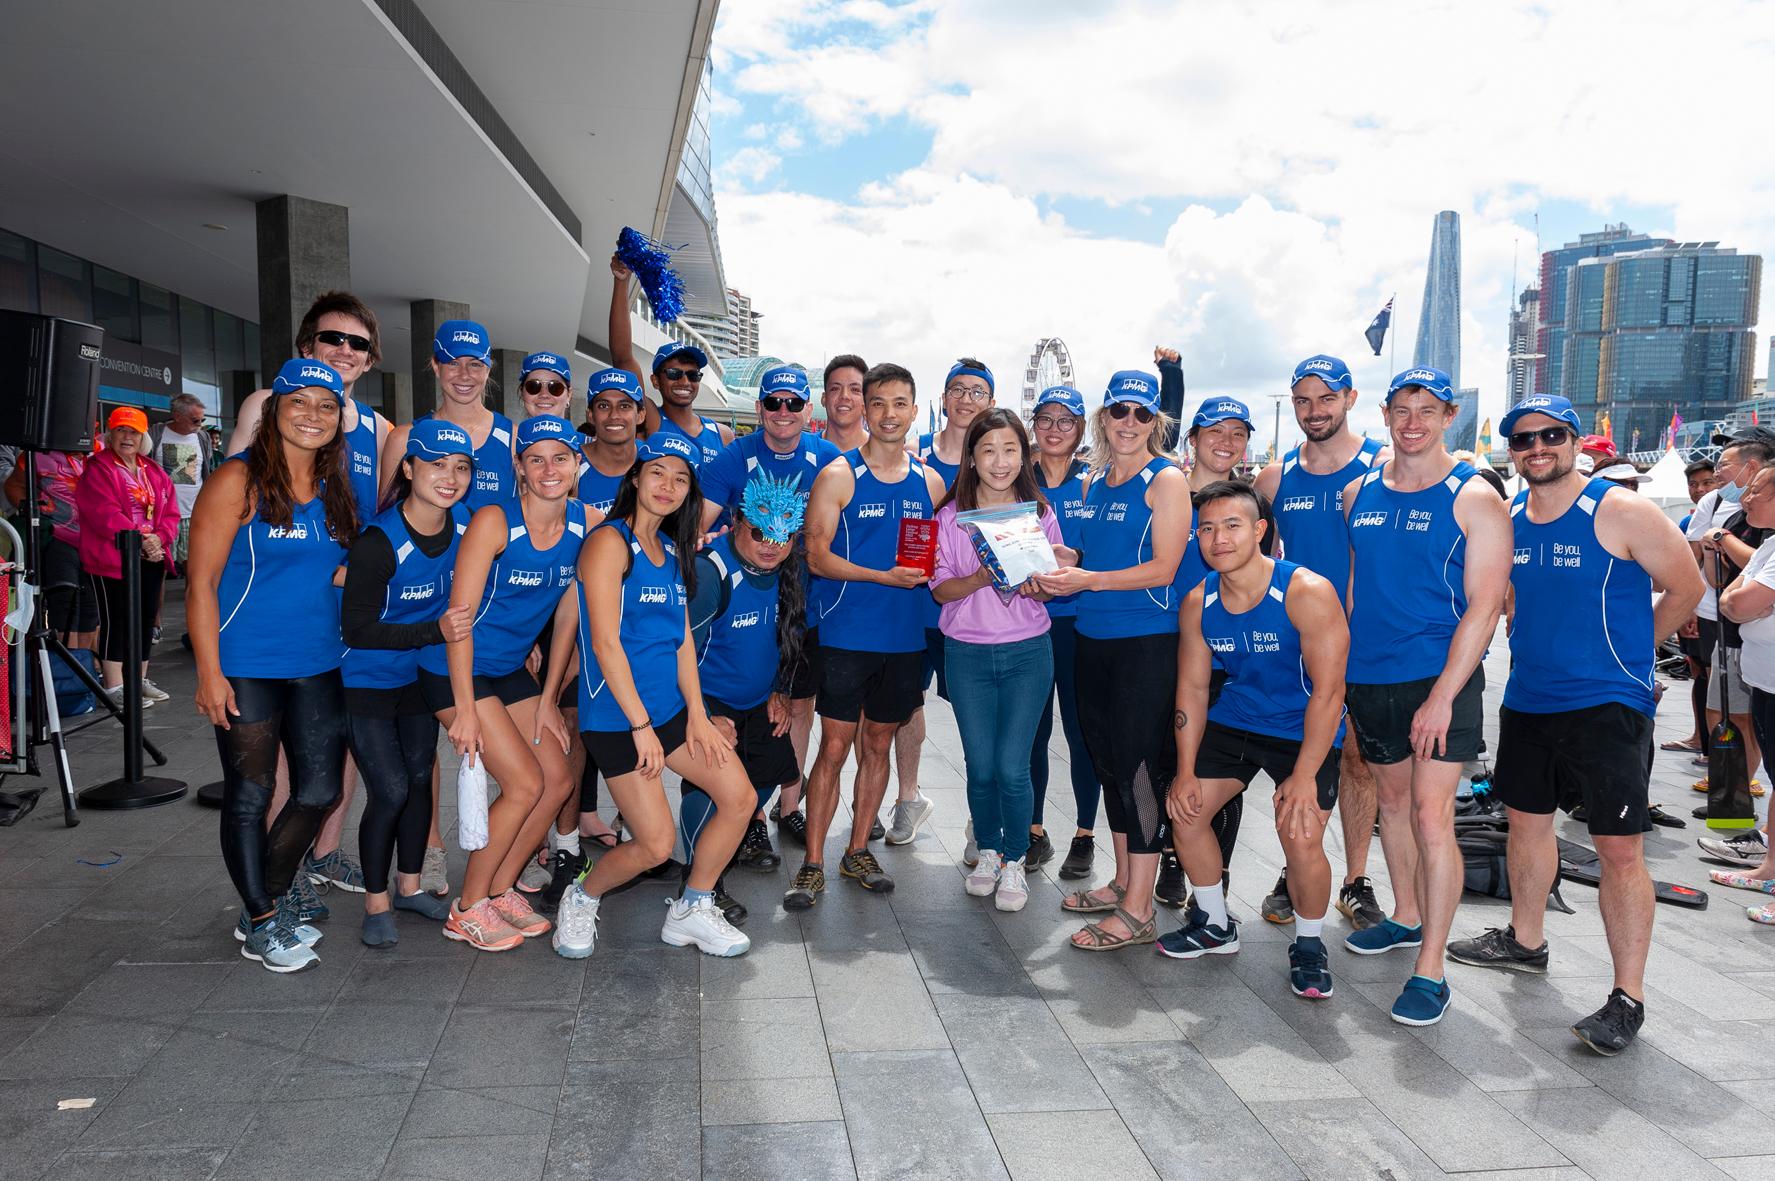 The Hong Kong Economic and Trade Office, Sydney (HKETO) participated in the Sydney Lunar Festival Dragon Boat Races in Darling Harbour in Sydney, Australia on February 5 and 6. The Director of the HKETO, Miss Trista Lim (first row, fifth right), is pictured presenting a trophy to the winning team of the Hong Kong Metropolis Cup on February 6.